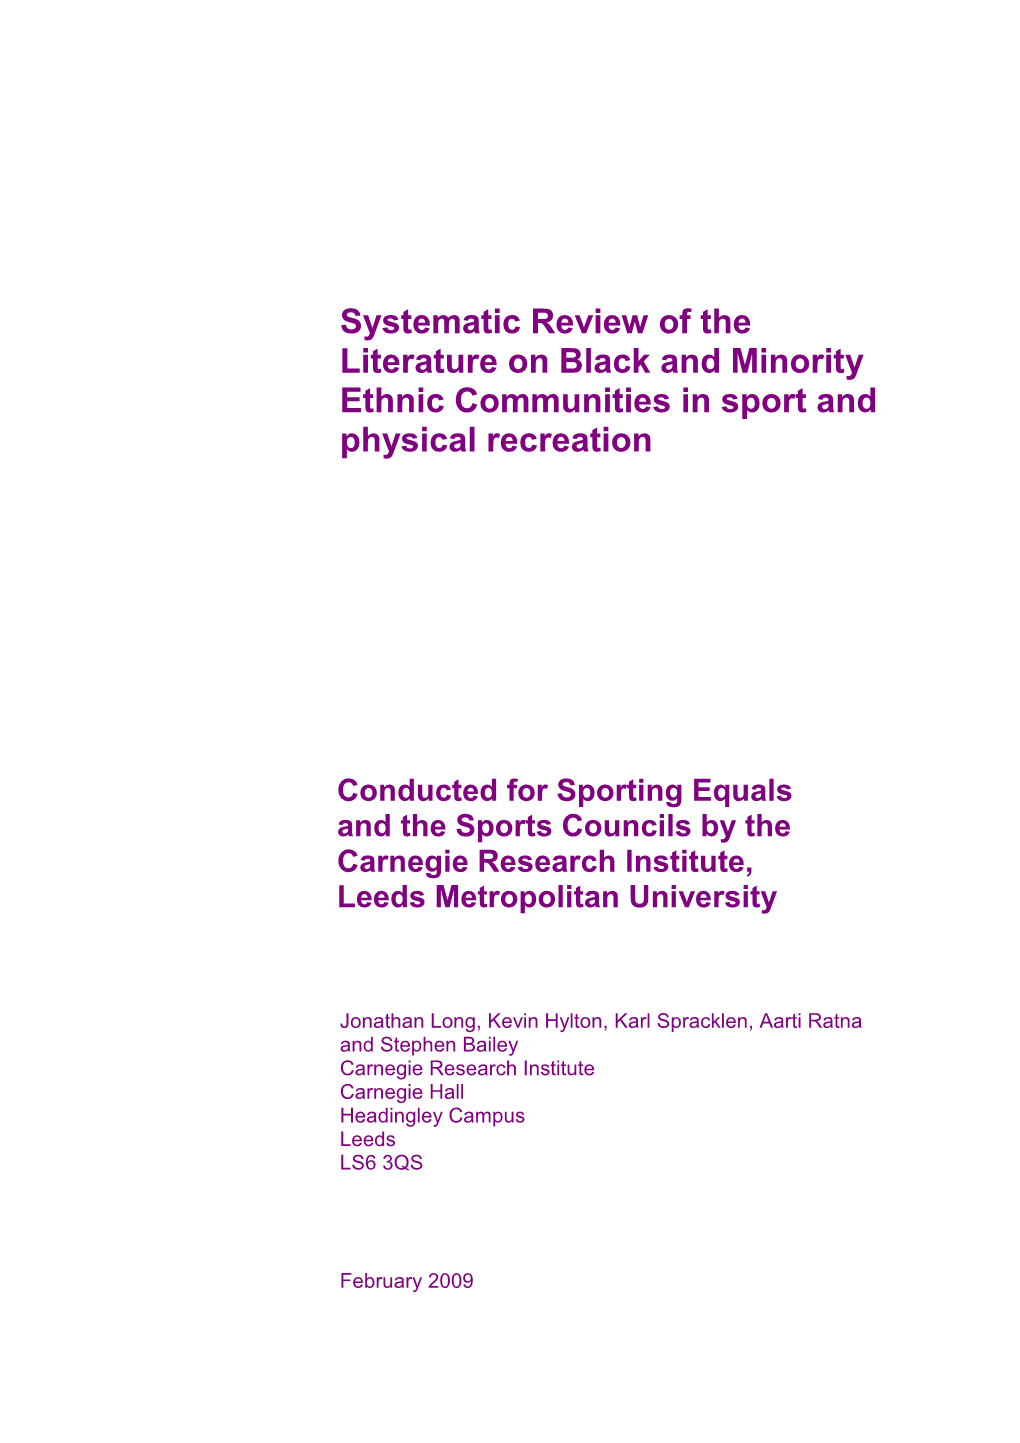 Systematic Review of the Literature on Black and Minority Ethnic Communities in Sport and Physical Recreation